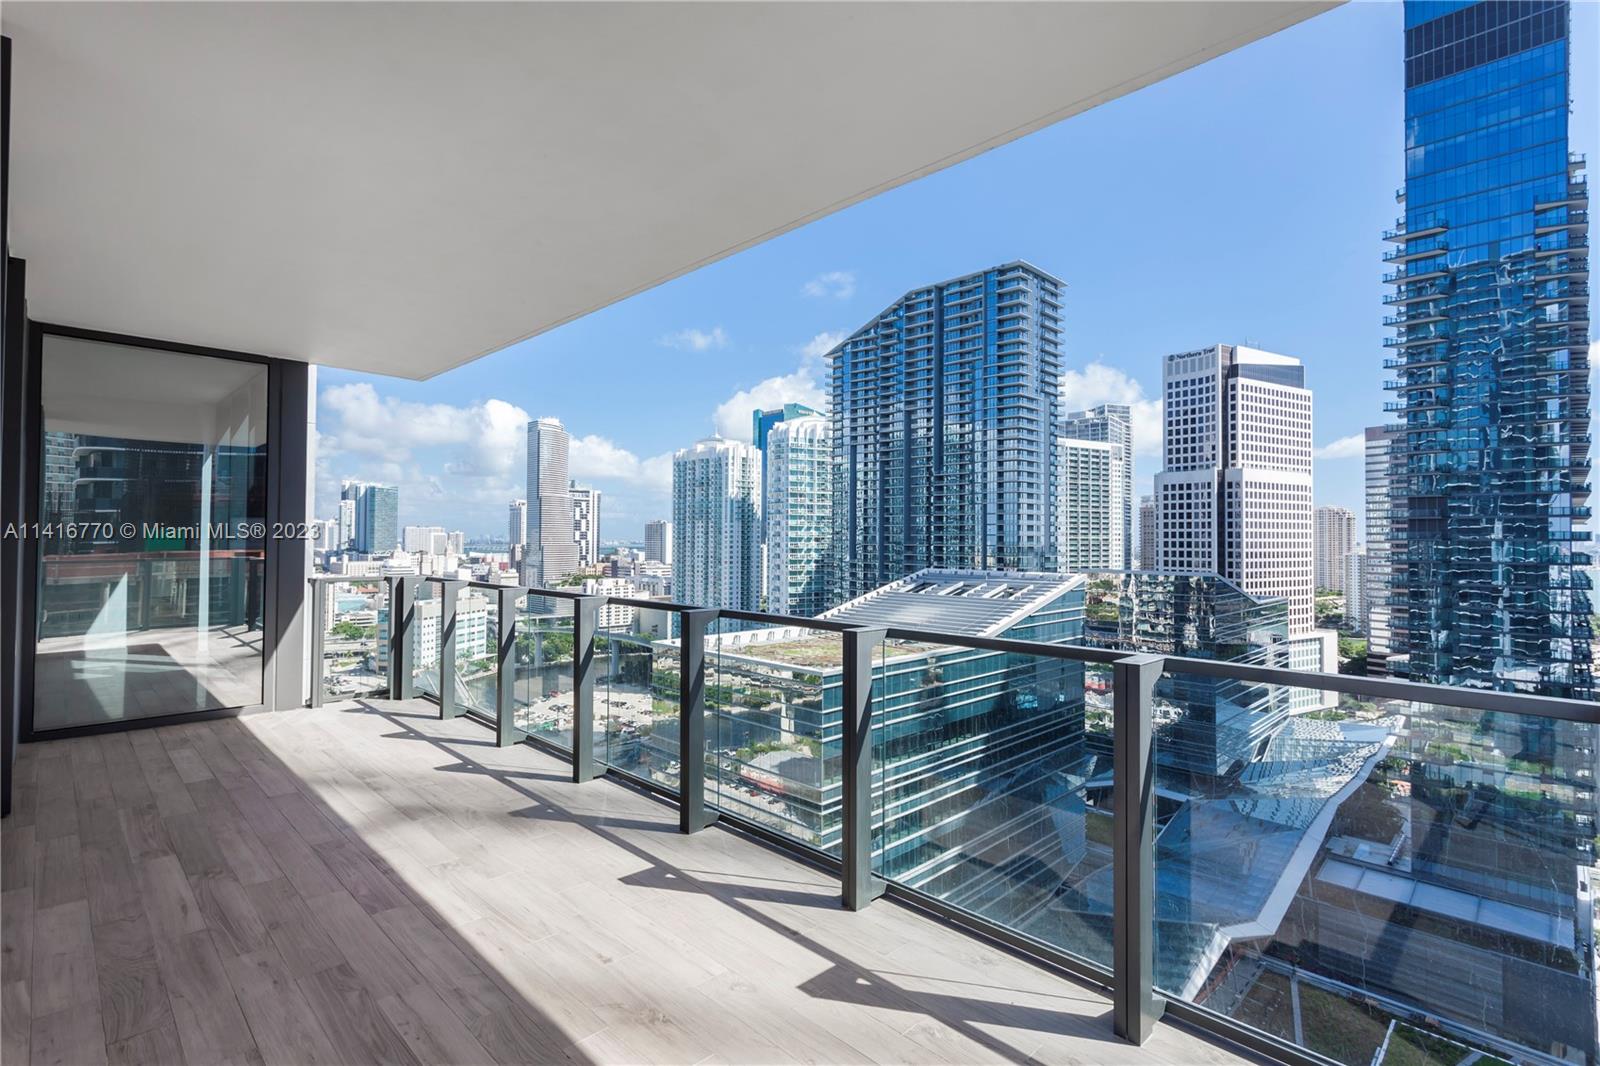 Enjoy Panoramic skyline views from this  South East corner apartment at Rise Brickell City Center. Rarely available corner, this 2bd/2bth unit,  has floor to ceiling windows in every room, Italian cabinets, Bosch appliances, walk-in closets & marble floors. Full service building, 24-hr concierge & all the amenities you could wish for! Live in the heart of Brickell and minutes from the airport, arts and entertainment district, Miami Beach, Coconut Grove and Key Biscayne.